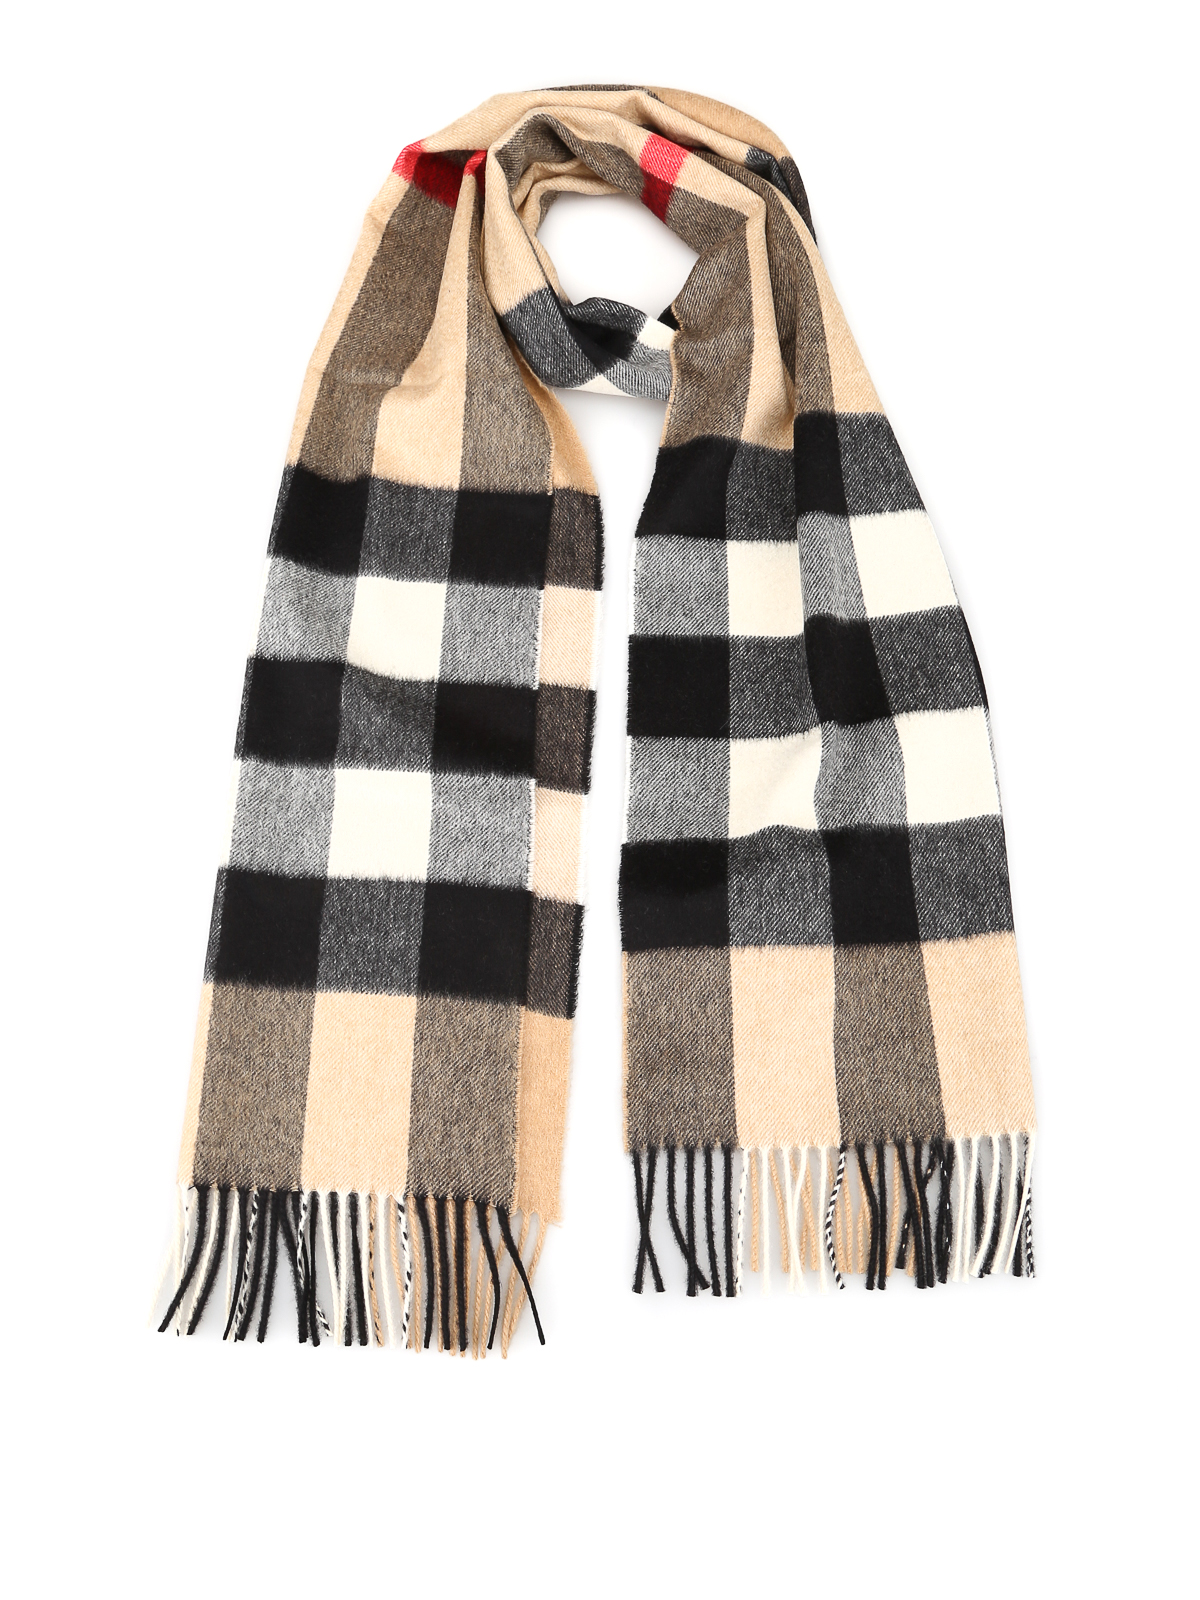 where can i buy a burberry scarf